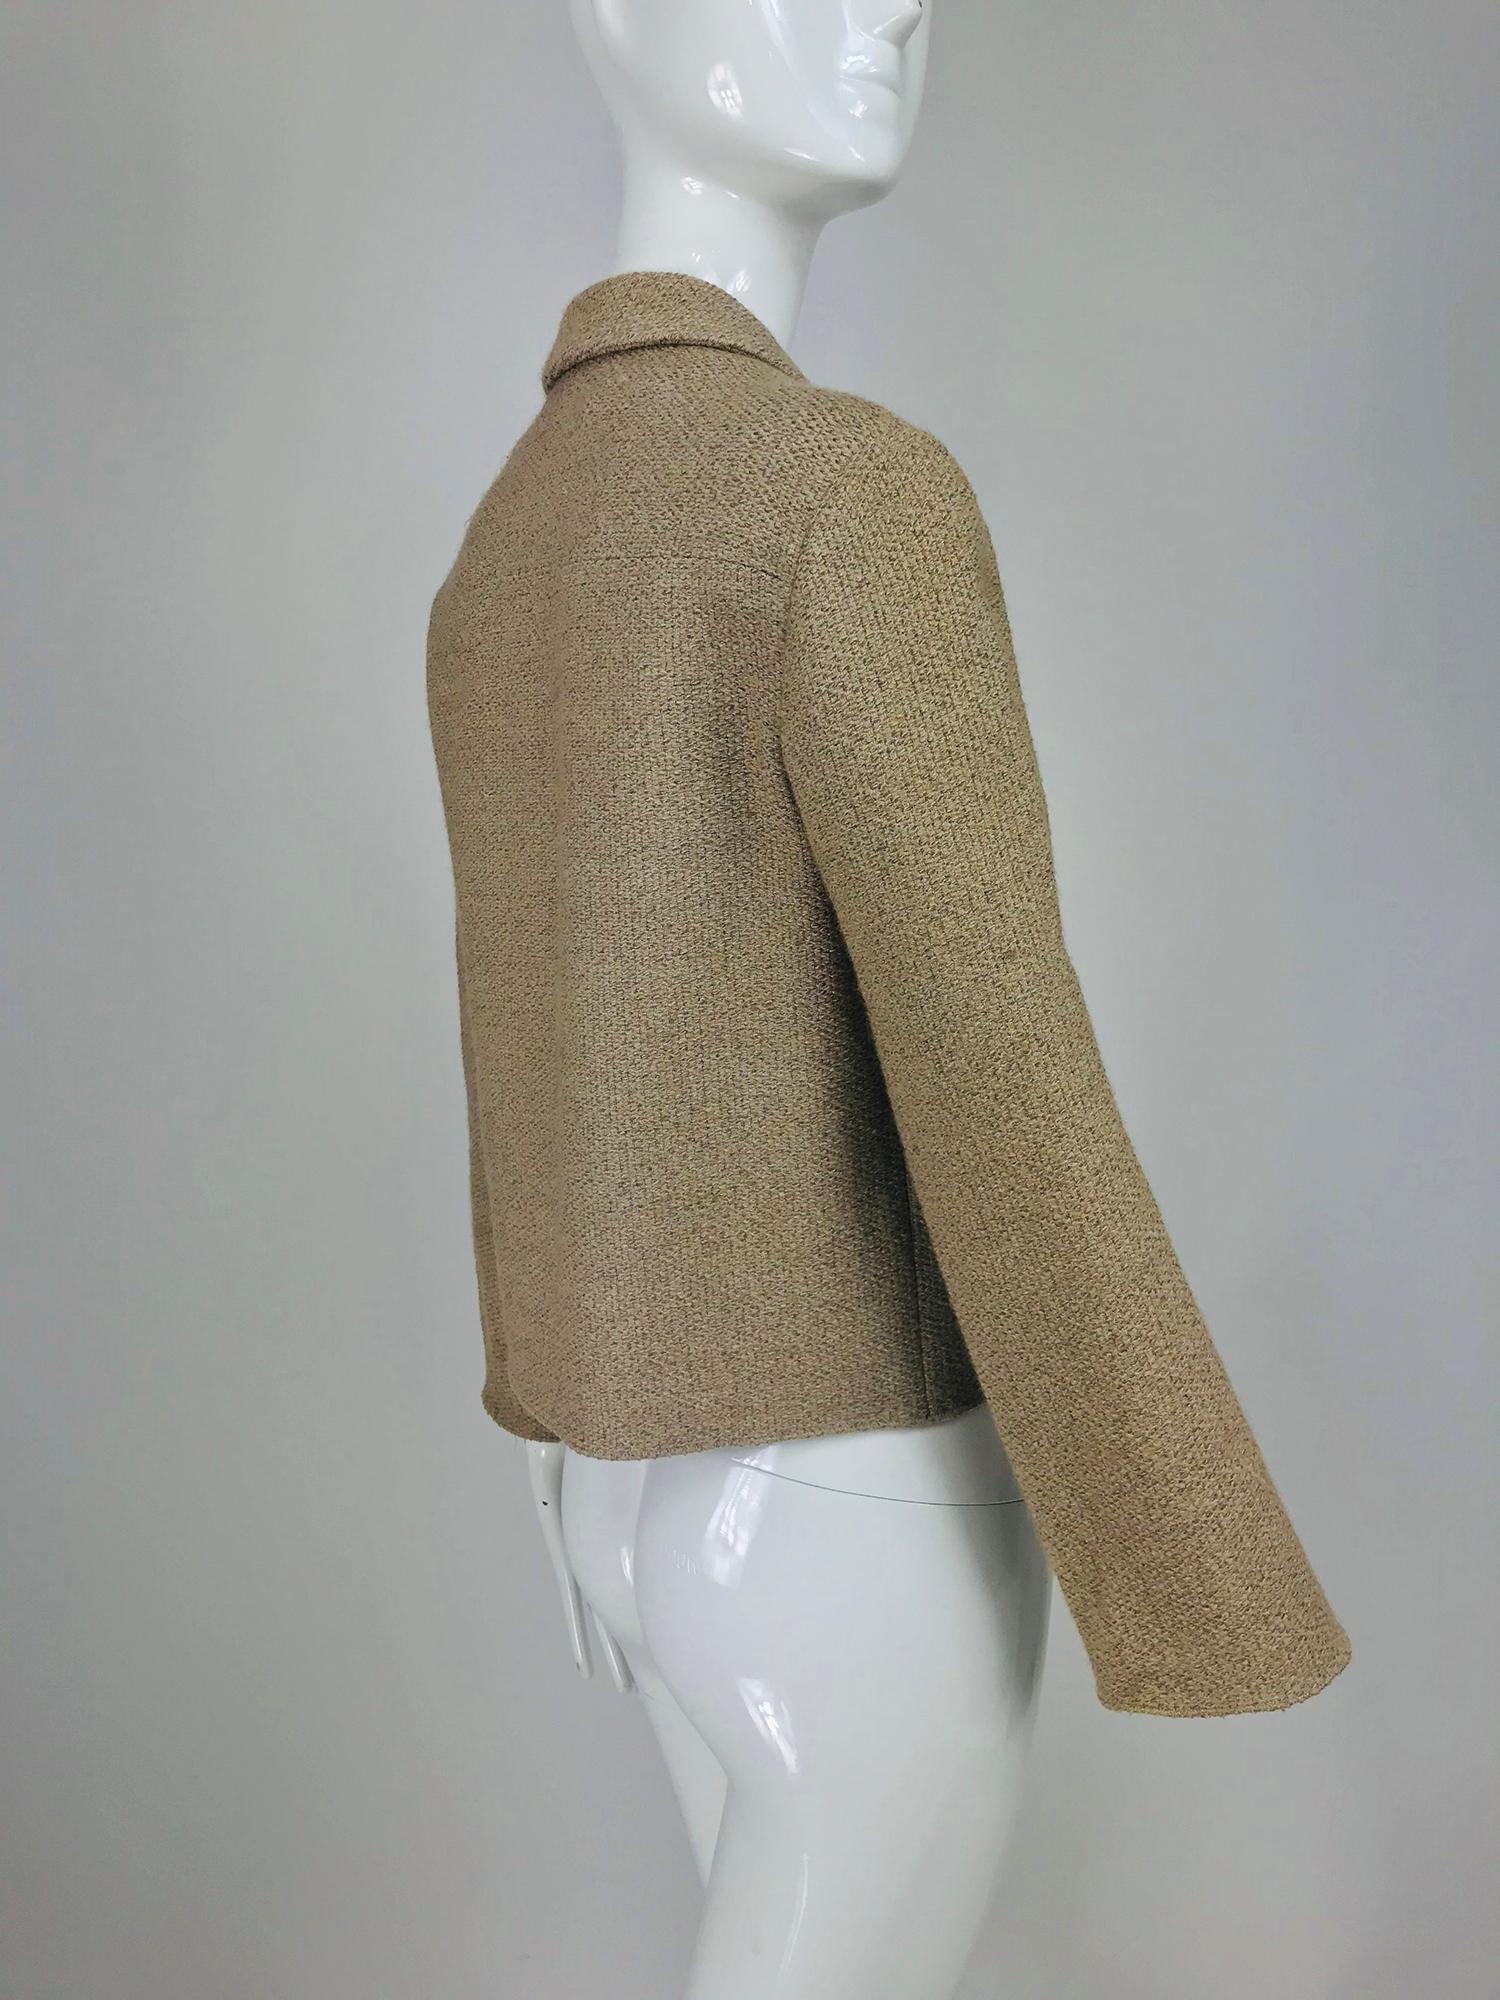 Chanel Beige Double Pocket Hook Front Unlined Jacket 02A In Good Condition For Sale In West Palm Beach, FL